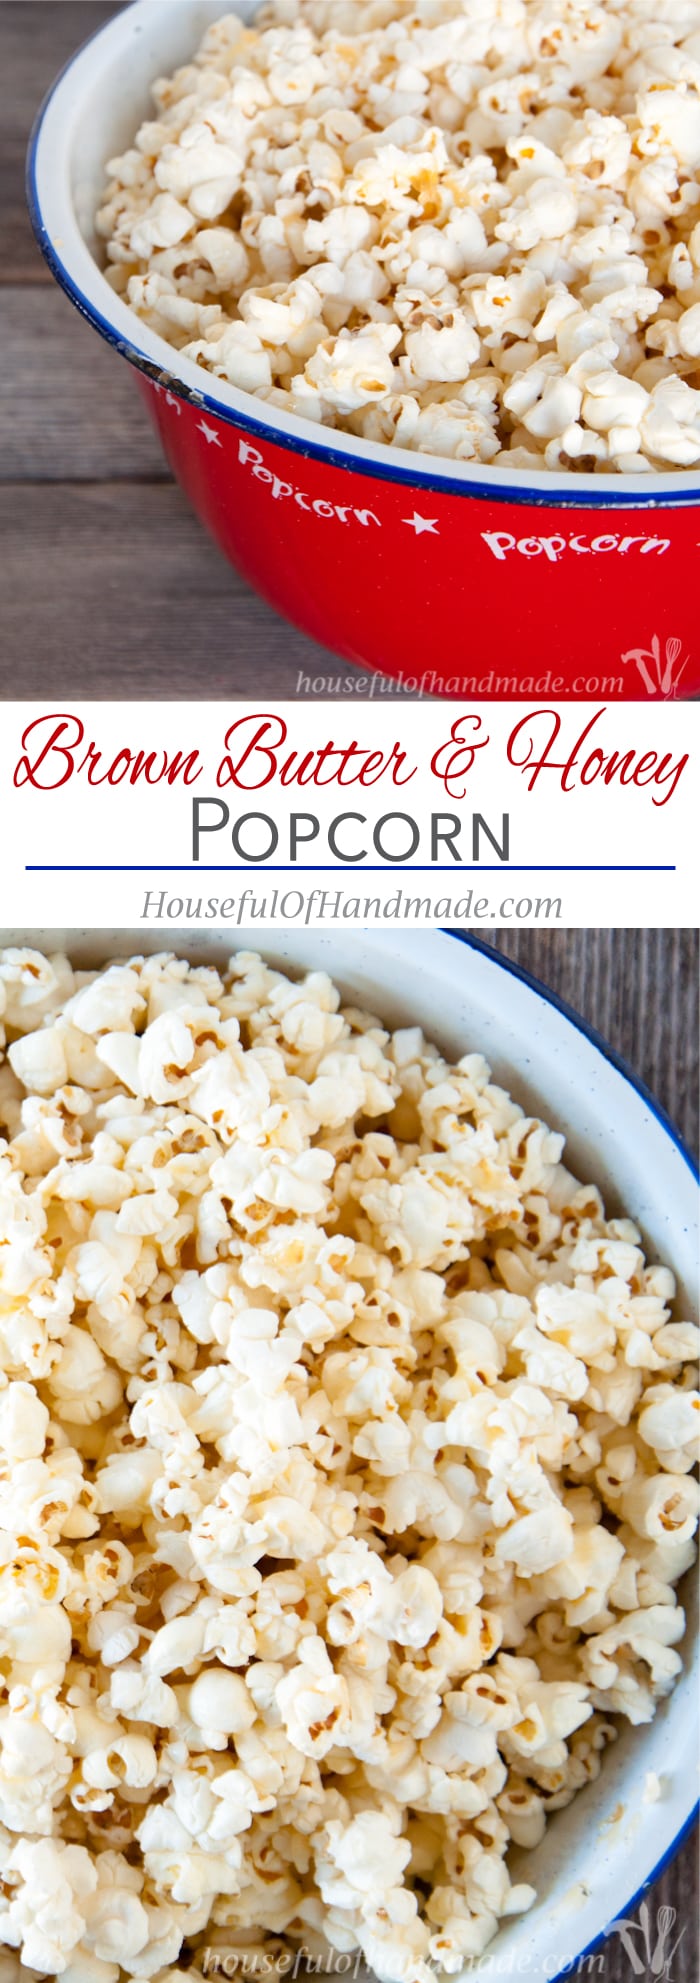 For something super easy and absolutely delicious, you have to try this Brown Butter & Honey Popcorn. The brown butter adds a rustic nuttiness to the popcorn and the honey adds a little sweetness. | Housefulofhandmade.com